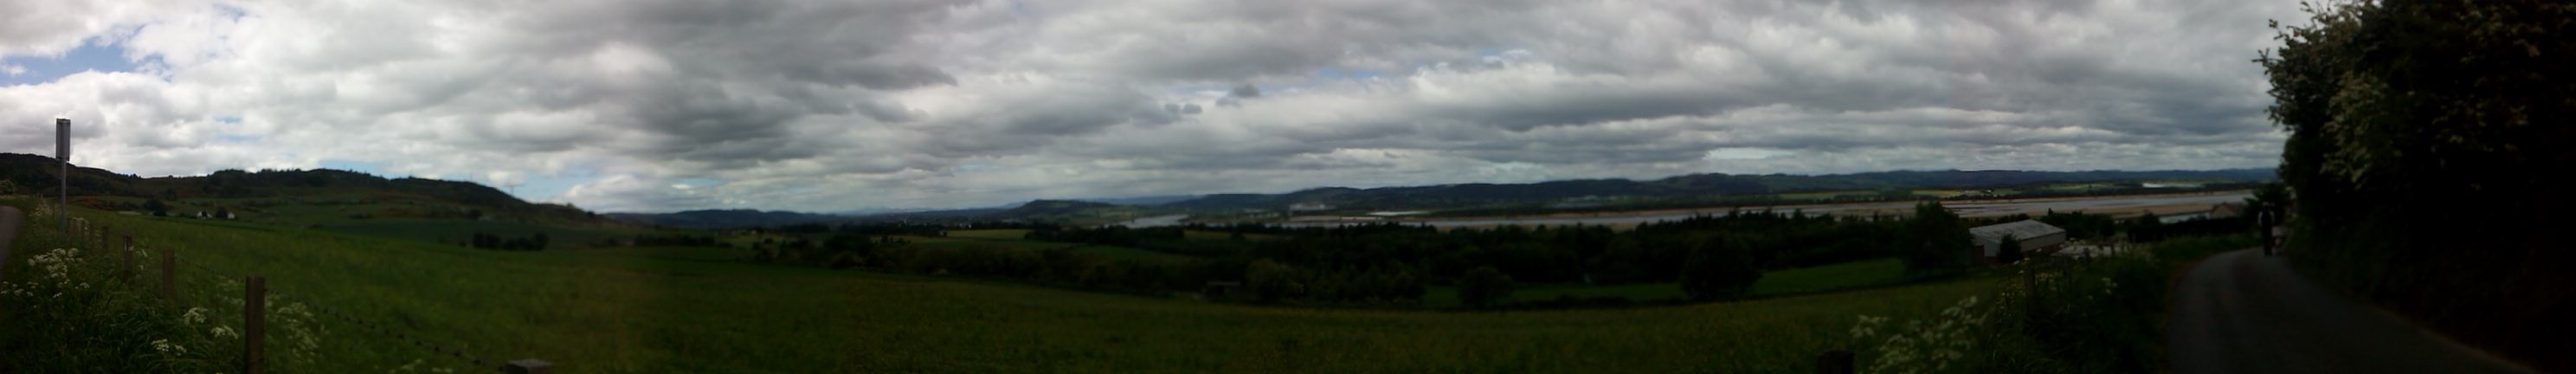 Panorama under cloudy skies, across fields, woodlands and water